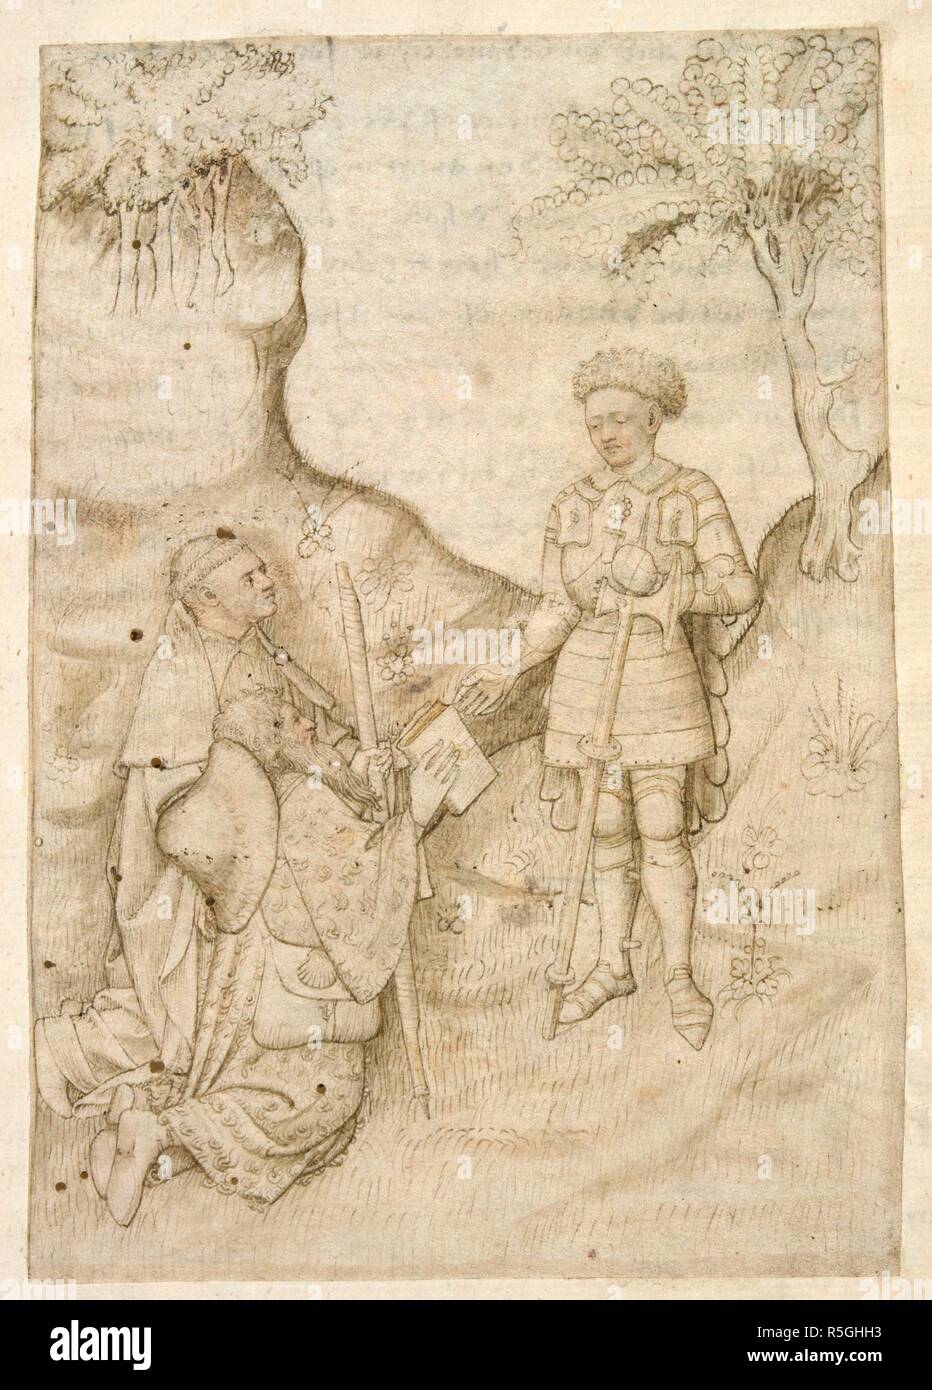 Detail of an inserted miniature of a kneeling pilgrim, accompanied by a monk, presenting a book to a standing knight in armour. A later inscription on the facing folio identifies the monk as John Lydgate, and the knight as the Earl of Salisbury, to whom Lydgate's 'The Pilgrimage of the Life of Man' was dedicated. The figure of the monk may represent either Lydgate (d. c. 1450), a Benedictine monk at the abbey of Bury St Edwards, Suffolk, or Deguileville (d. c. 1358), a Cistercian at the abbey of Chalis in Valois, and the earl of Salisbury, Thomas Montague (d. 1428) may be the figure in armour. Stock Photo